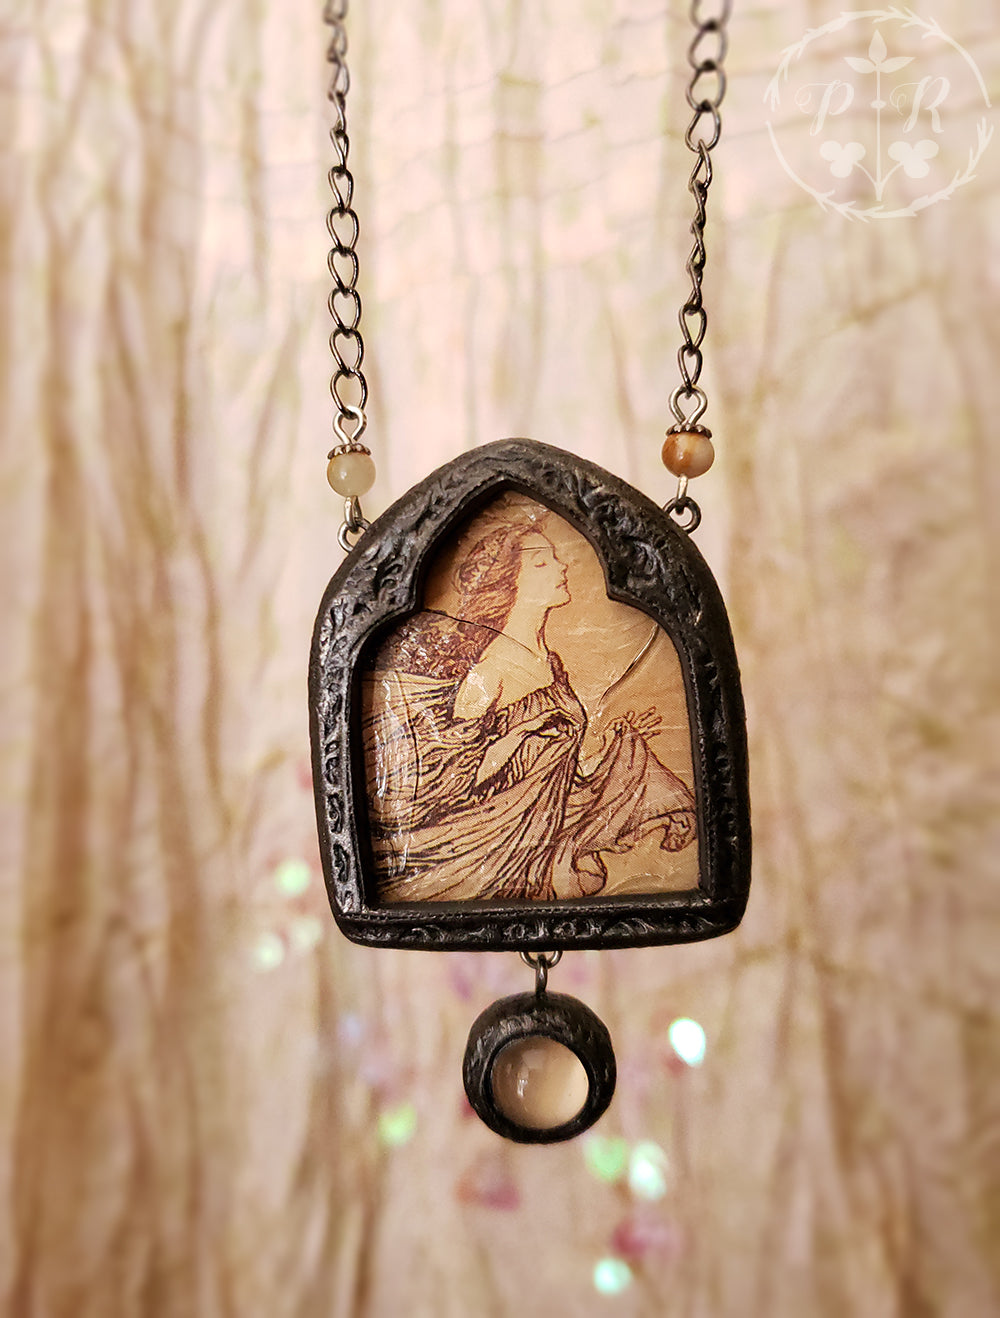 The Fairies Had Their Tiffs with the Birds ~ Pictorial Shrine Amulet